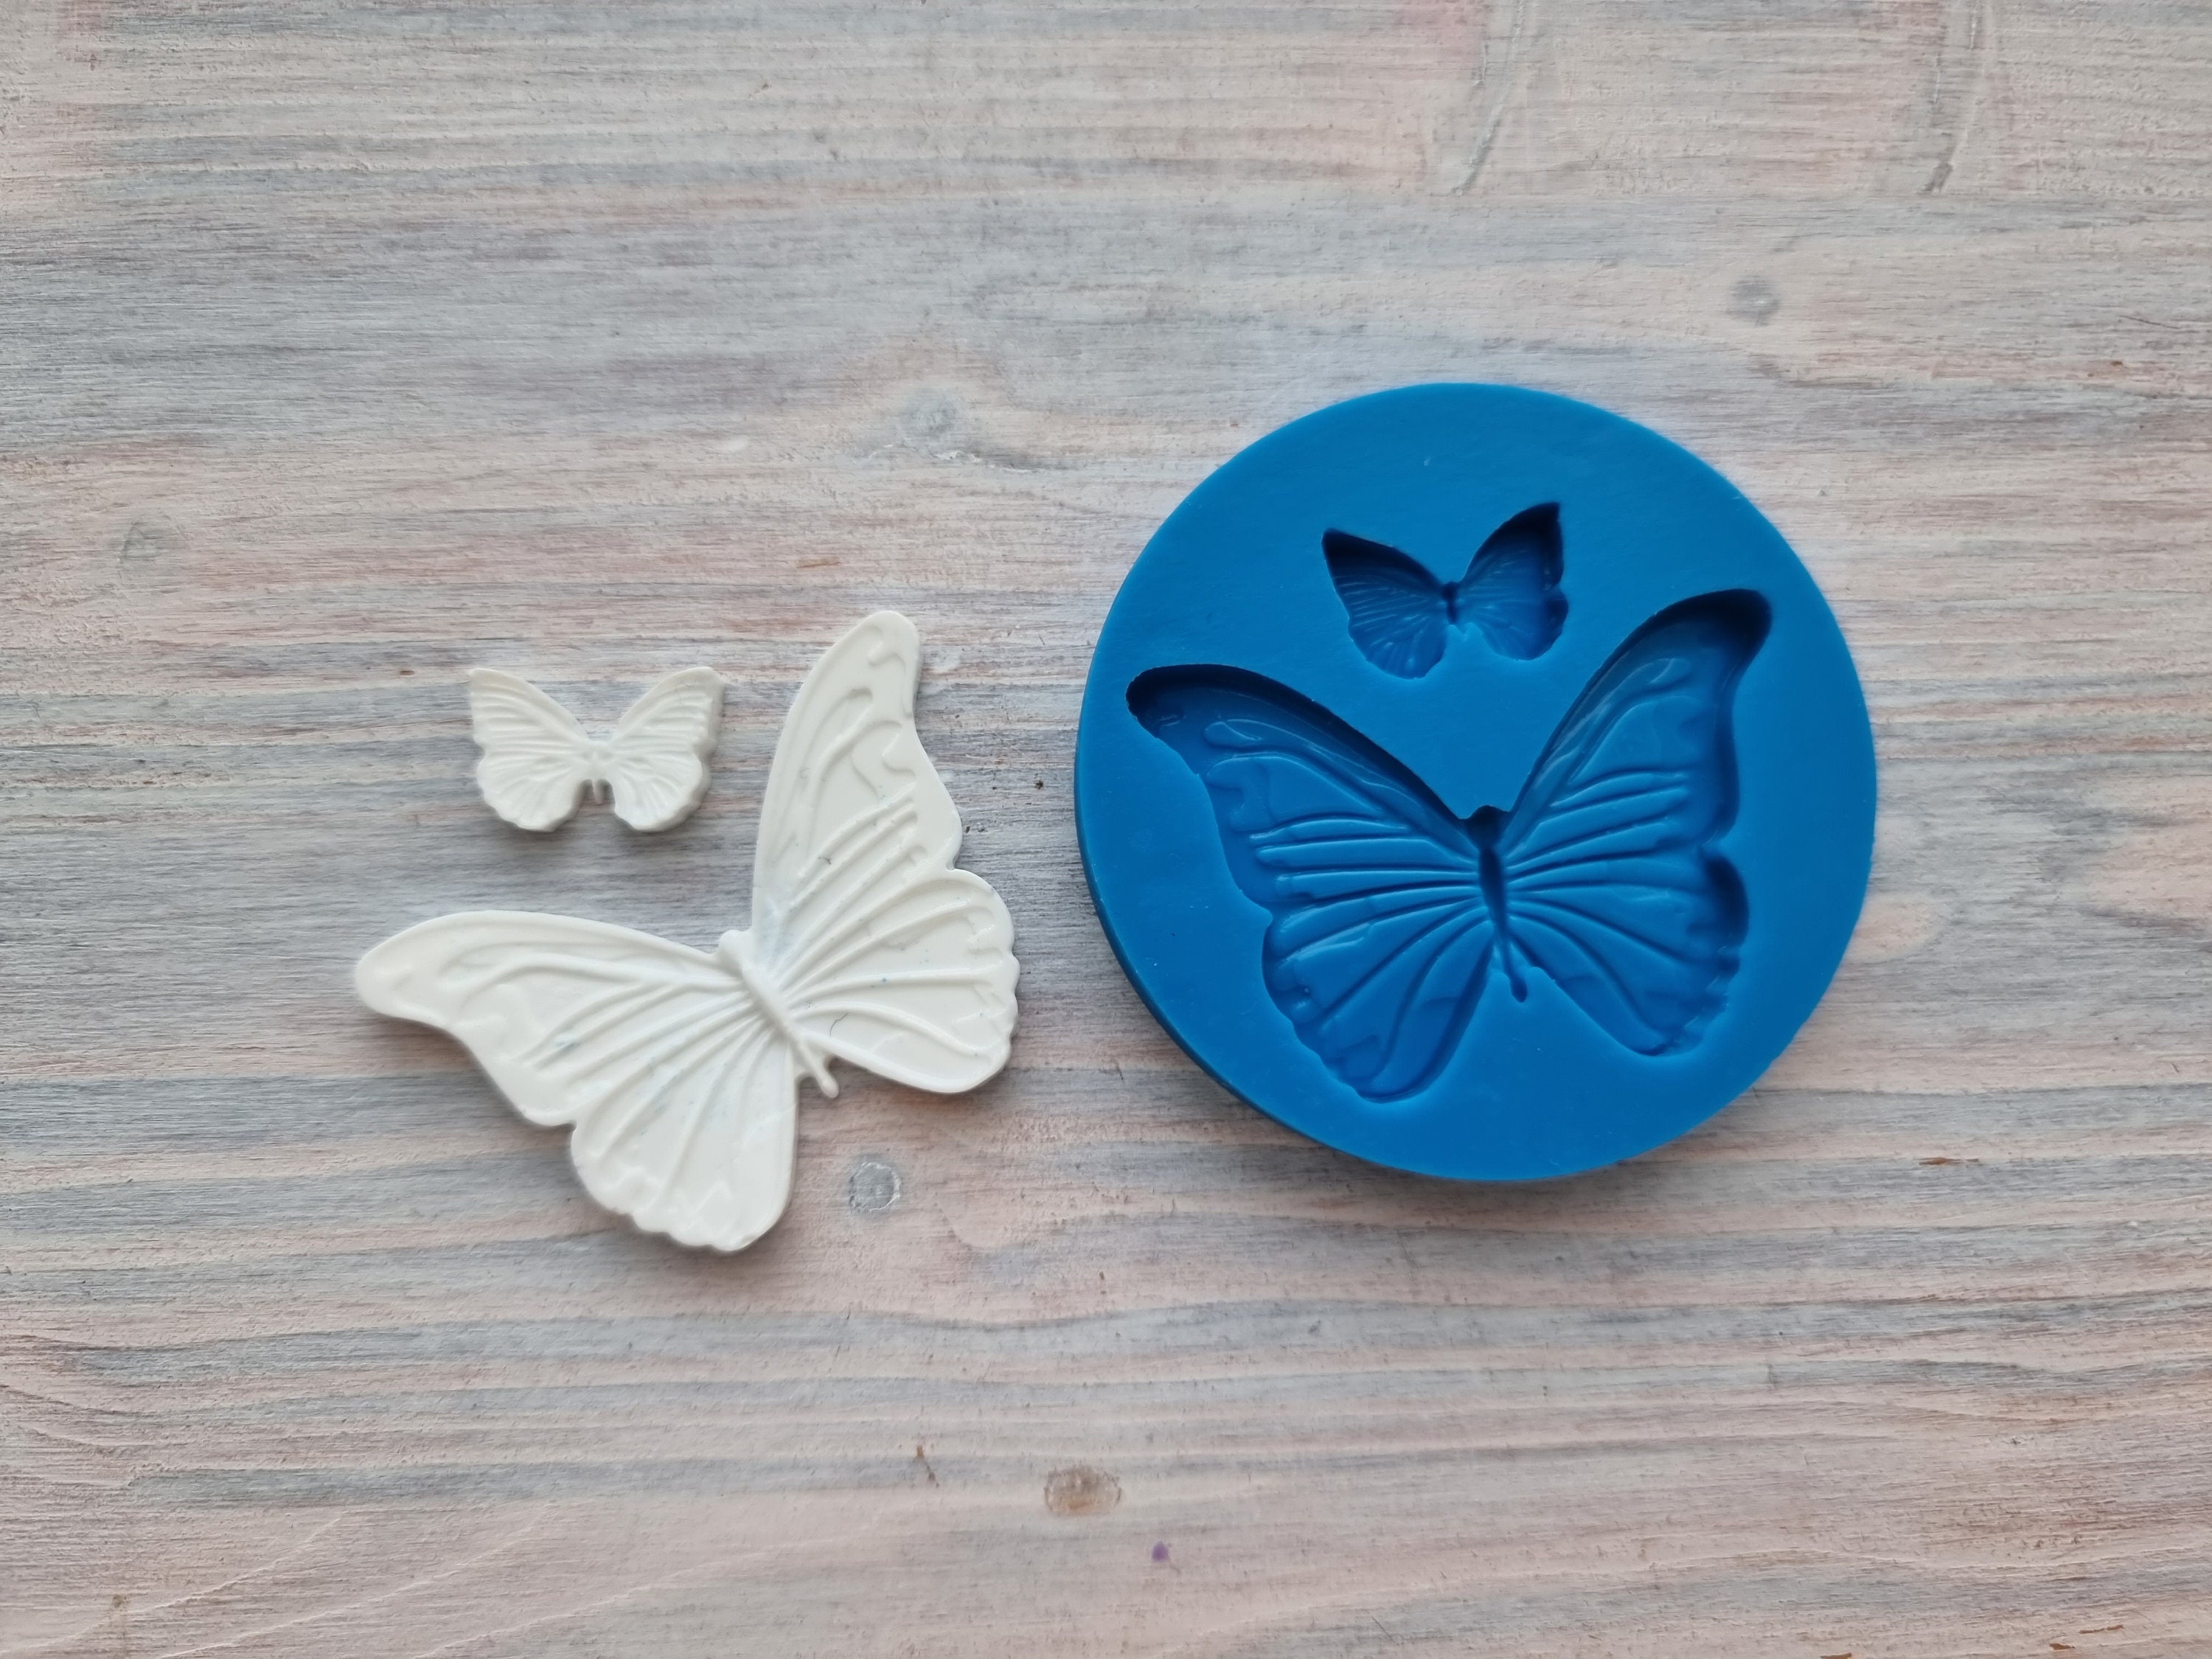 Silicone mold, Butterflies, 3 pcs., Modeling tools for sculpting animals,  for home decor